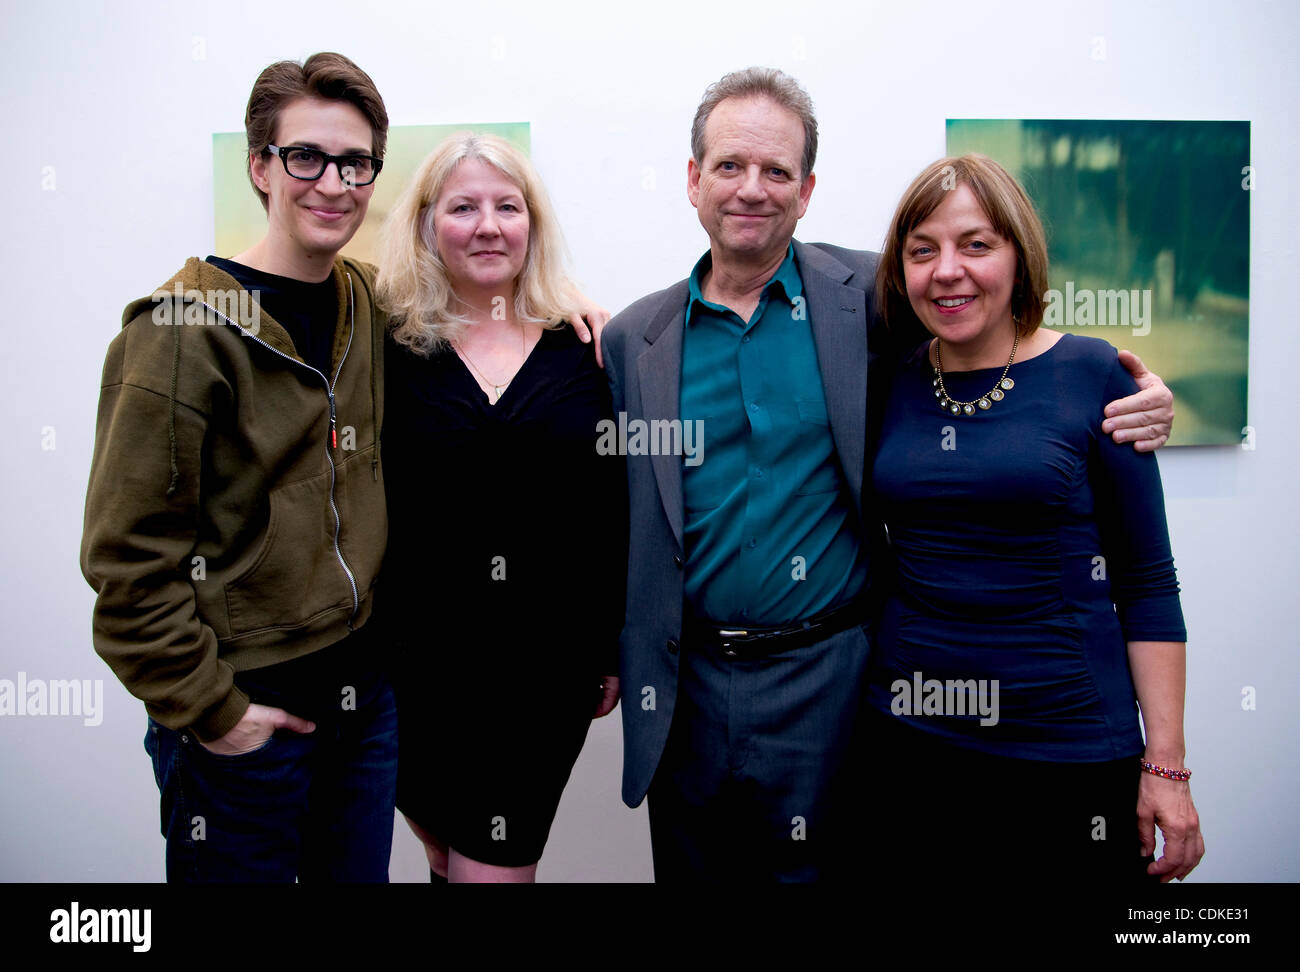 Mar.17, 2011 - San Francisco, California, USA - RACHEL MADDOW, her partner SUSAN MIKULA, GEORGE LAWSON and MARIE THIBEAULT at the dual opening reception for Ms. Mikula's 'American Vale' series of Polaroid photographs and Ms. Thibeault's Recent Paintings at the George Lawson Gallery. Stock Photo